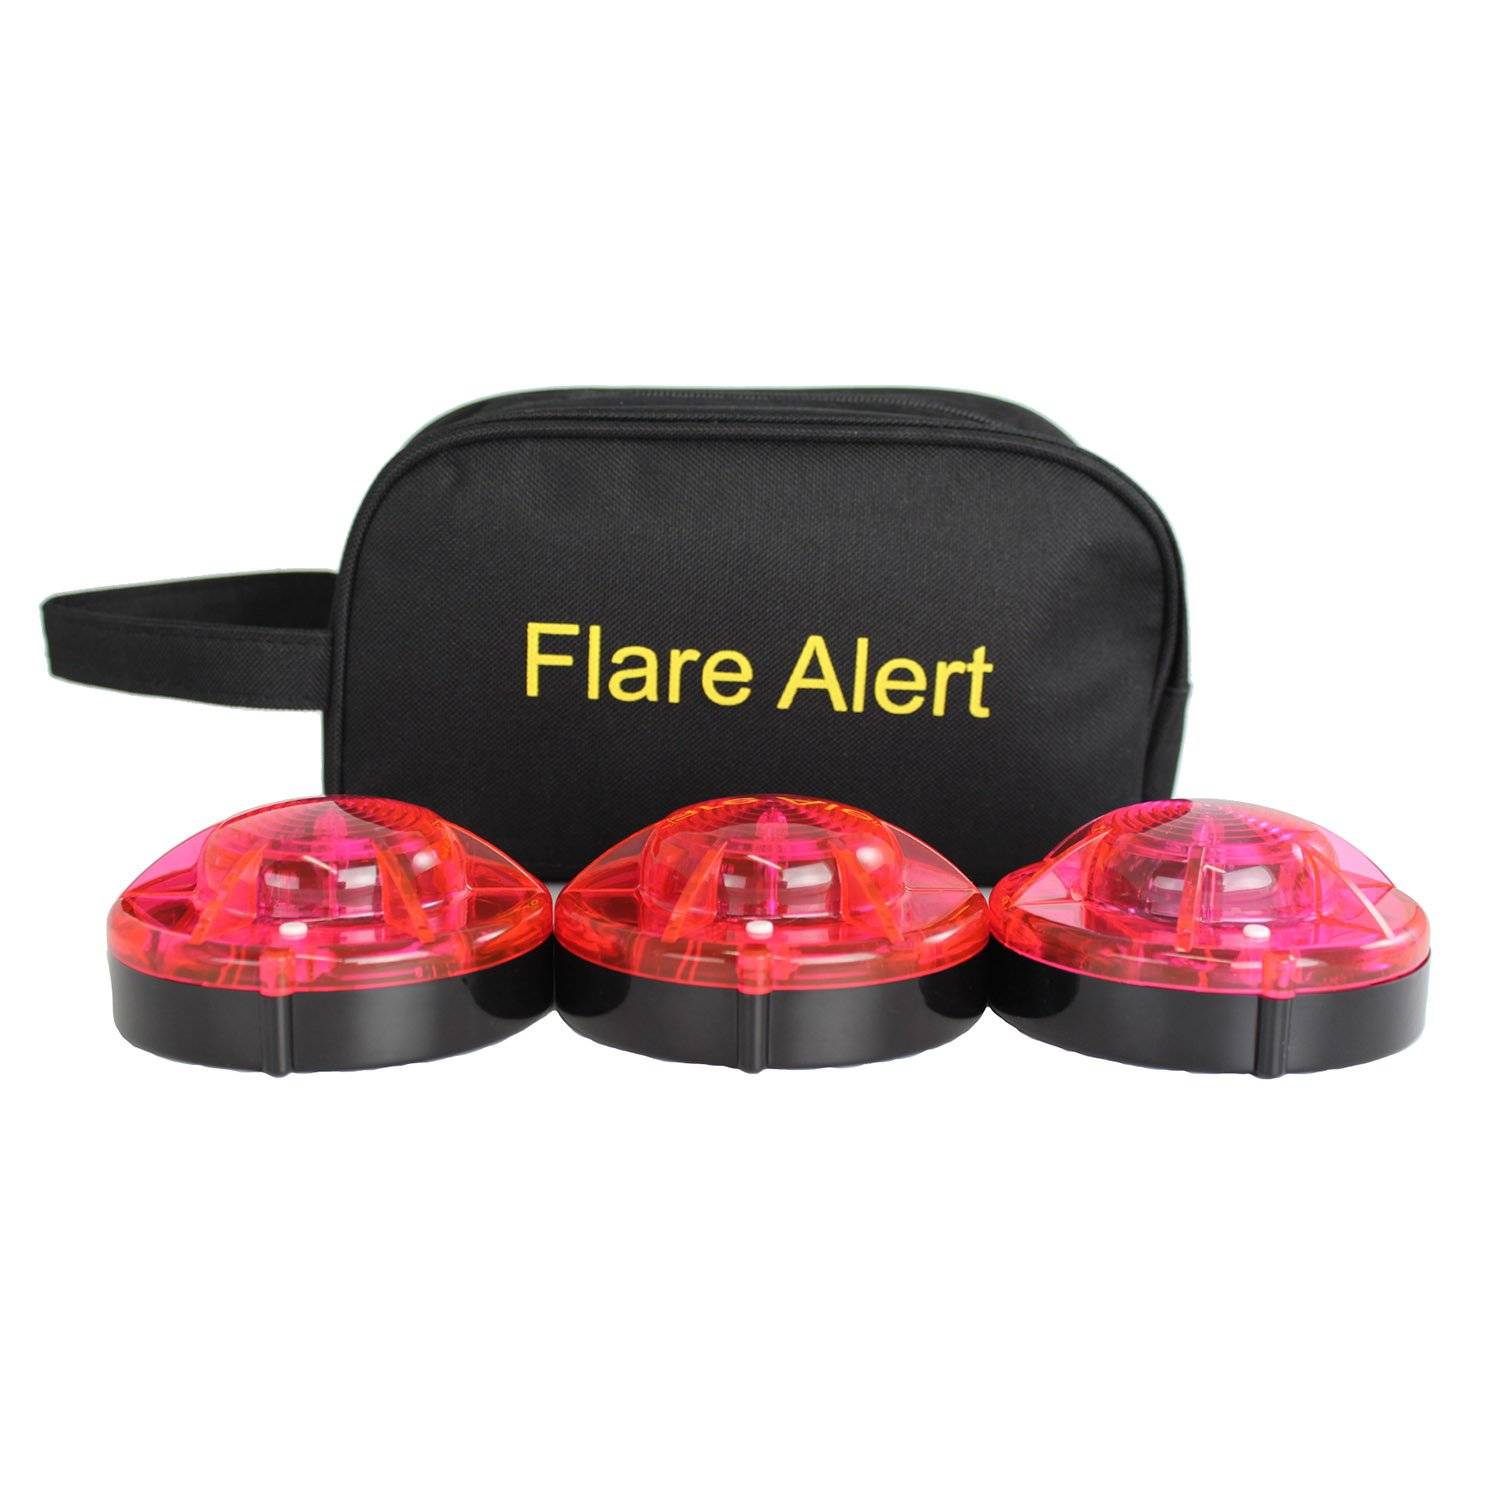 FLAREALERT SMALL LED BEACON FLARE KIT WITH BATTERIES AND CAS